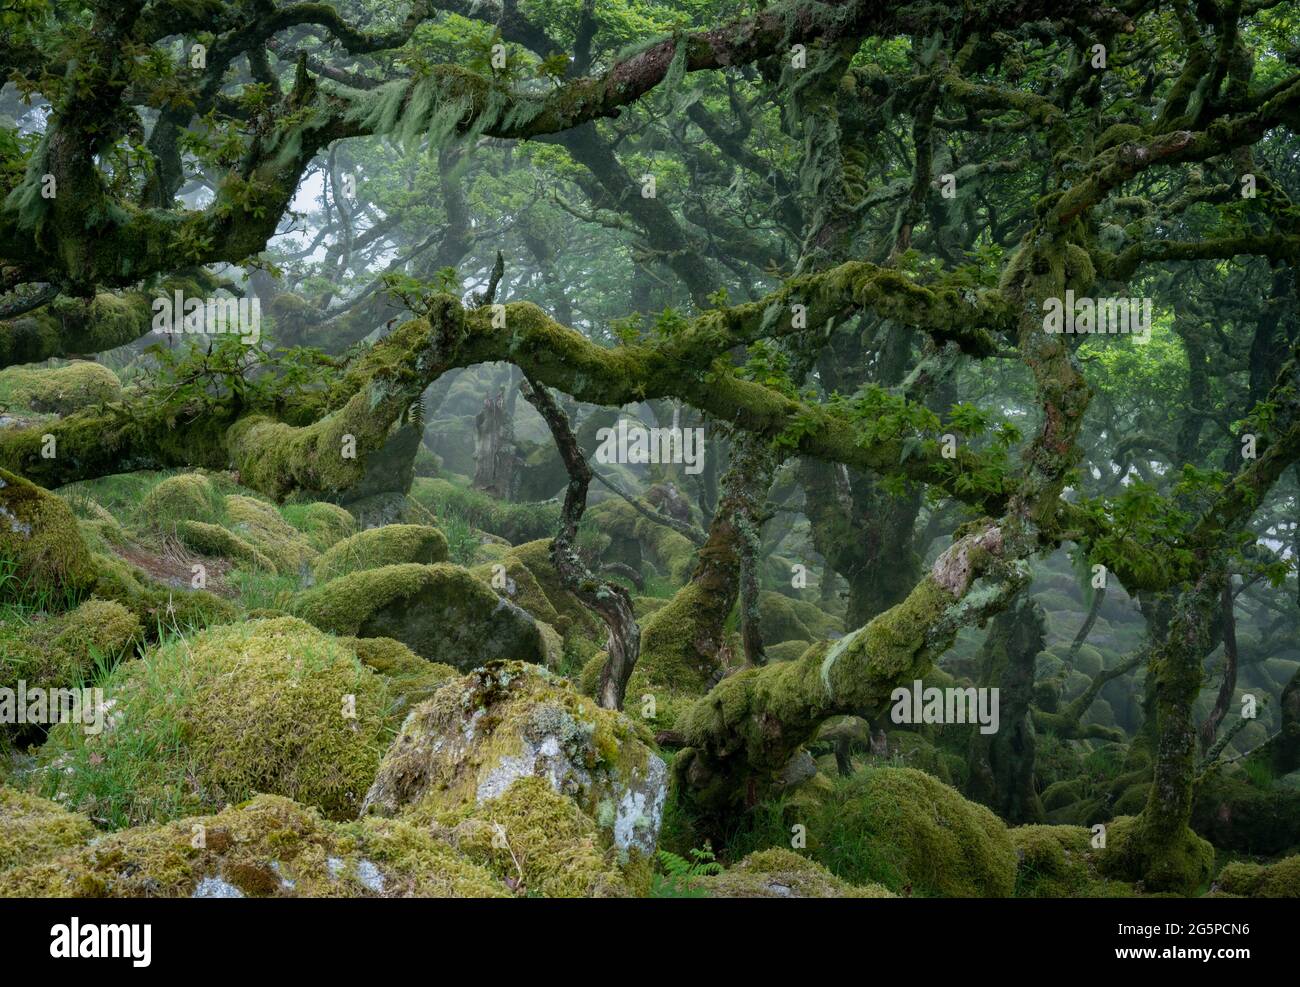 Twisted, stunted oak trees and moss covered boulders in the nature reserve of Wistman's Wood, Dartmoor National Park. (Summer 2021) Stock Photo